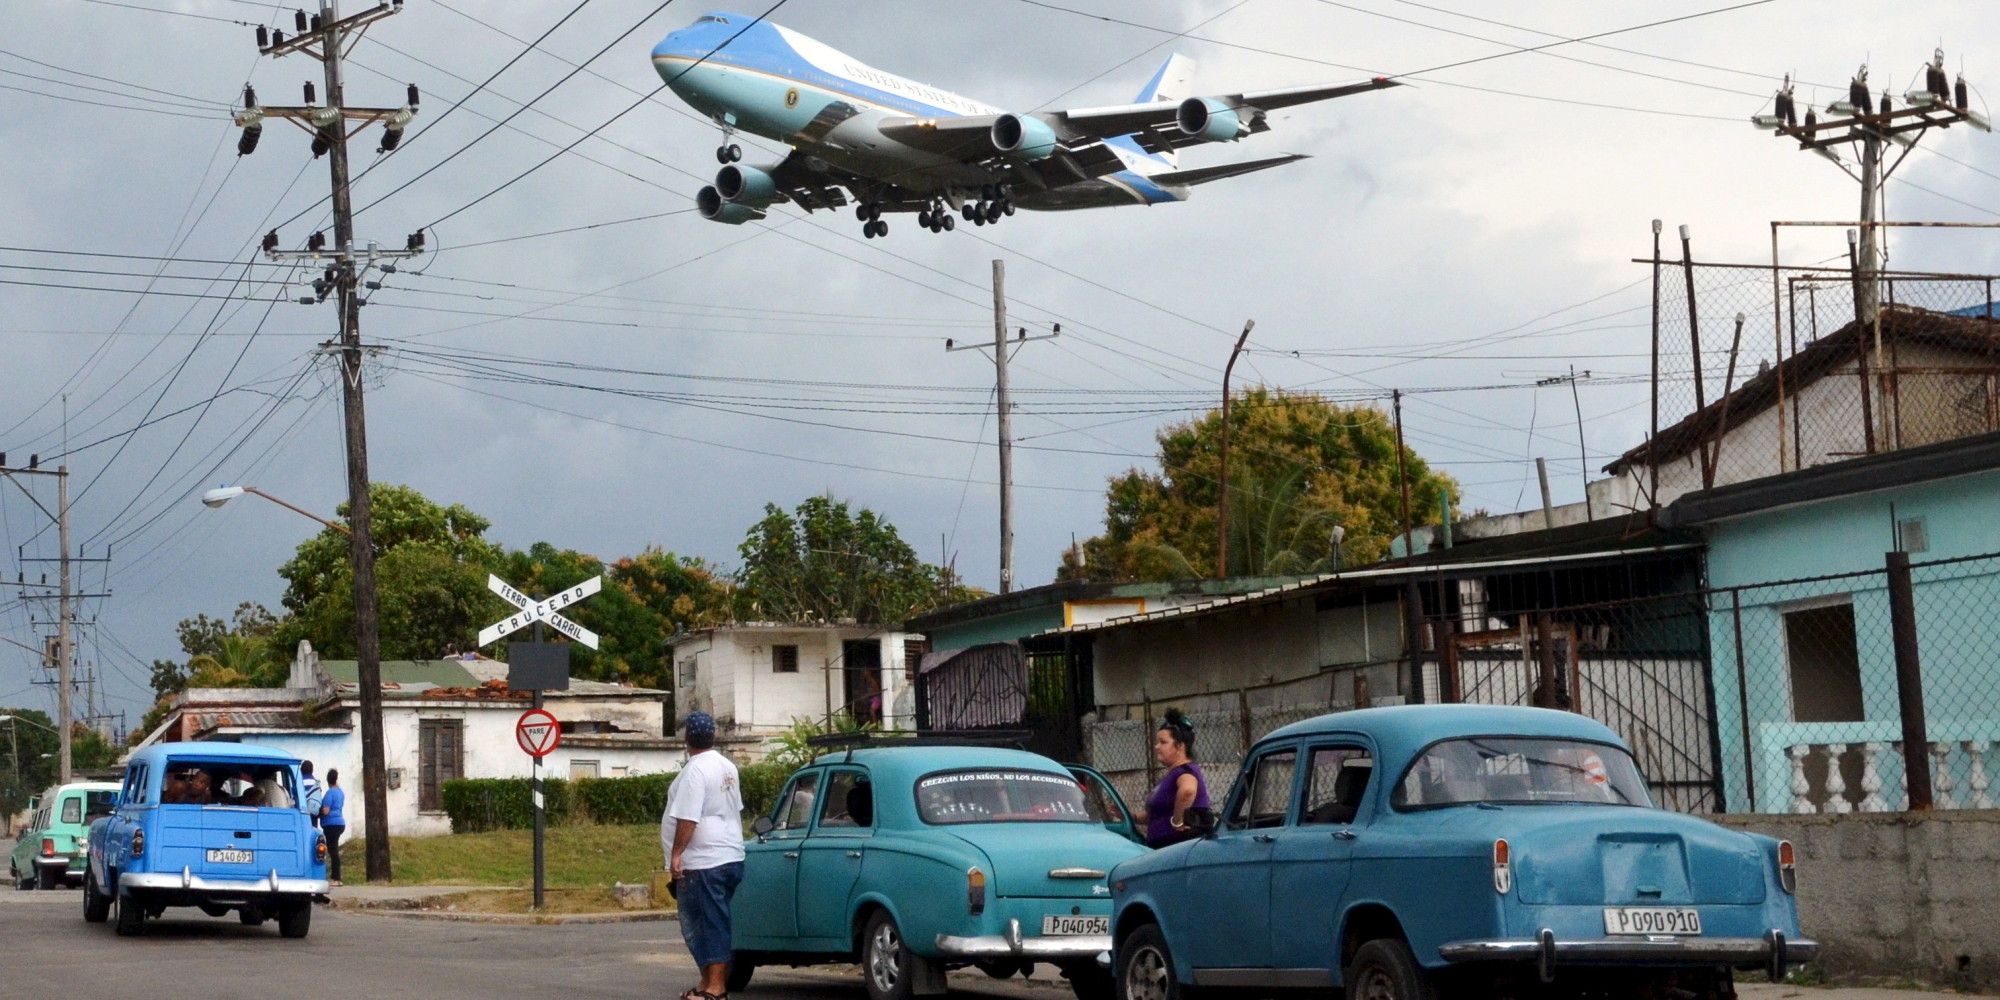 Air Force One carrying U.S. President Barack Obama and his family flies over a neighborhood of Havana as it approaches the runway to land at Havana's international airport, March 20, 2016. REUTERS/Stringer FOR EDITORIAL USE ONLY. NO RESALES. NO ARCHIVE. - RTSBD9J